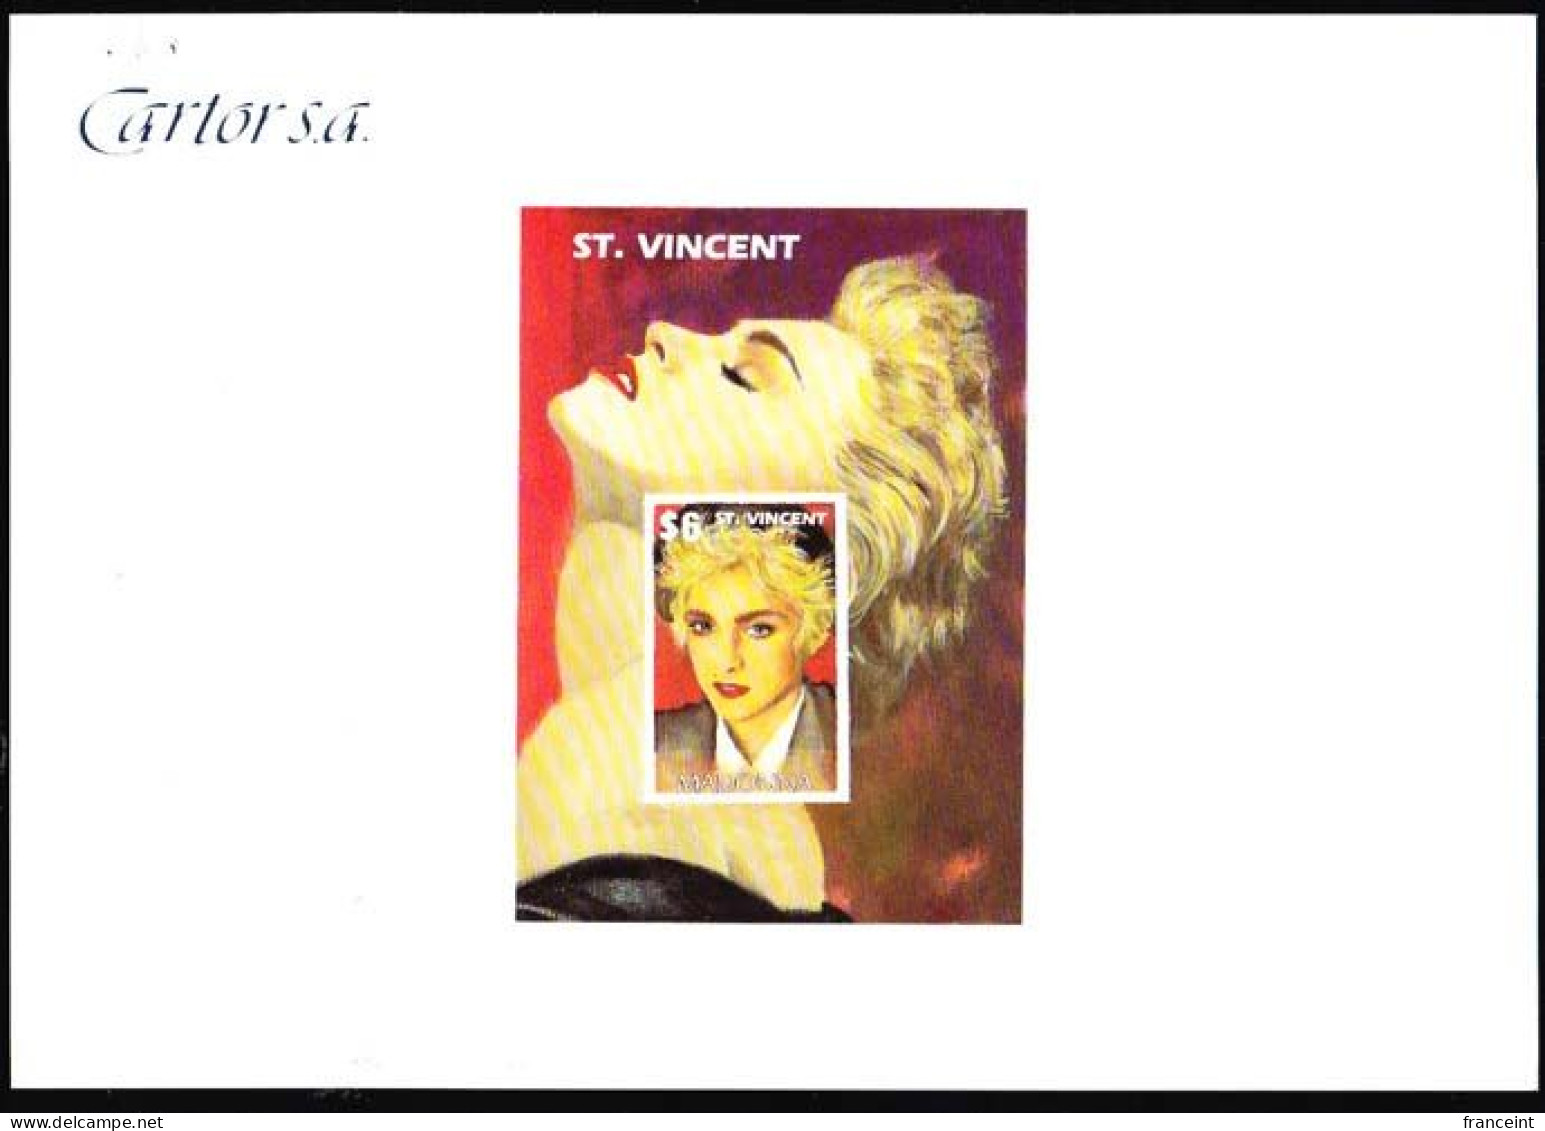 ST. VINCENT(1991) Madonna. Imperforate Proof Sheet Of S/S Mounted On Cartor S.A. Proof Card. Scott No 1504. - St.Vincent (1979-...)